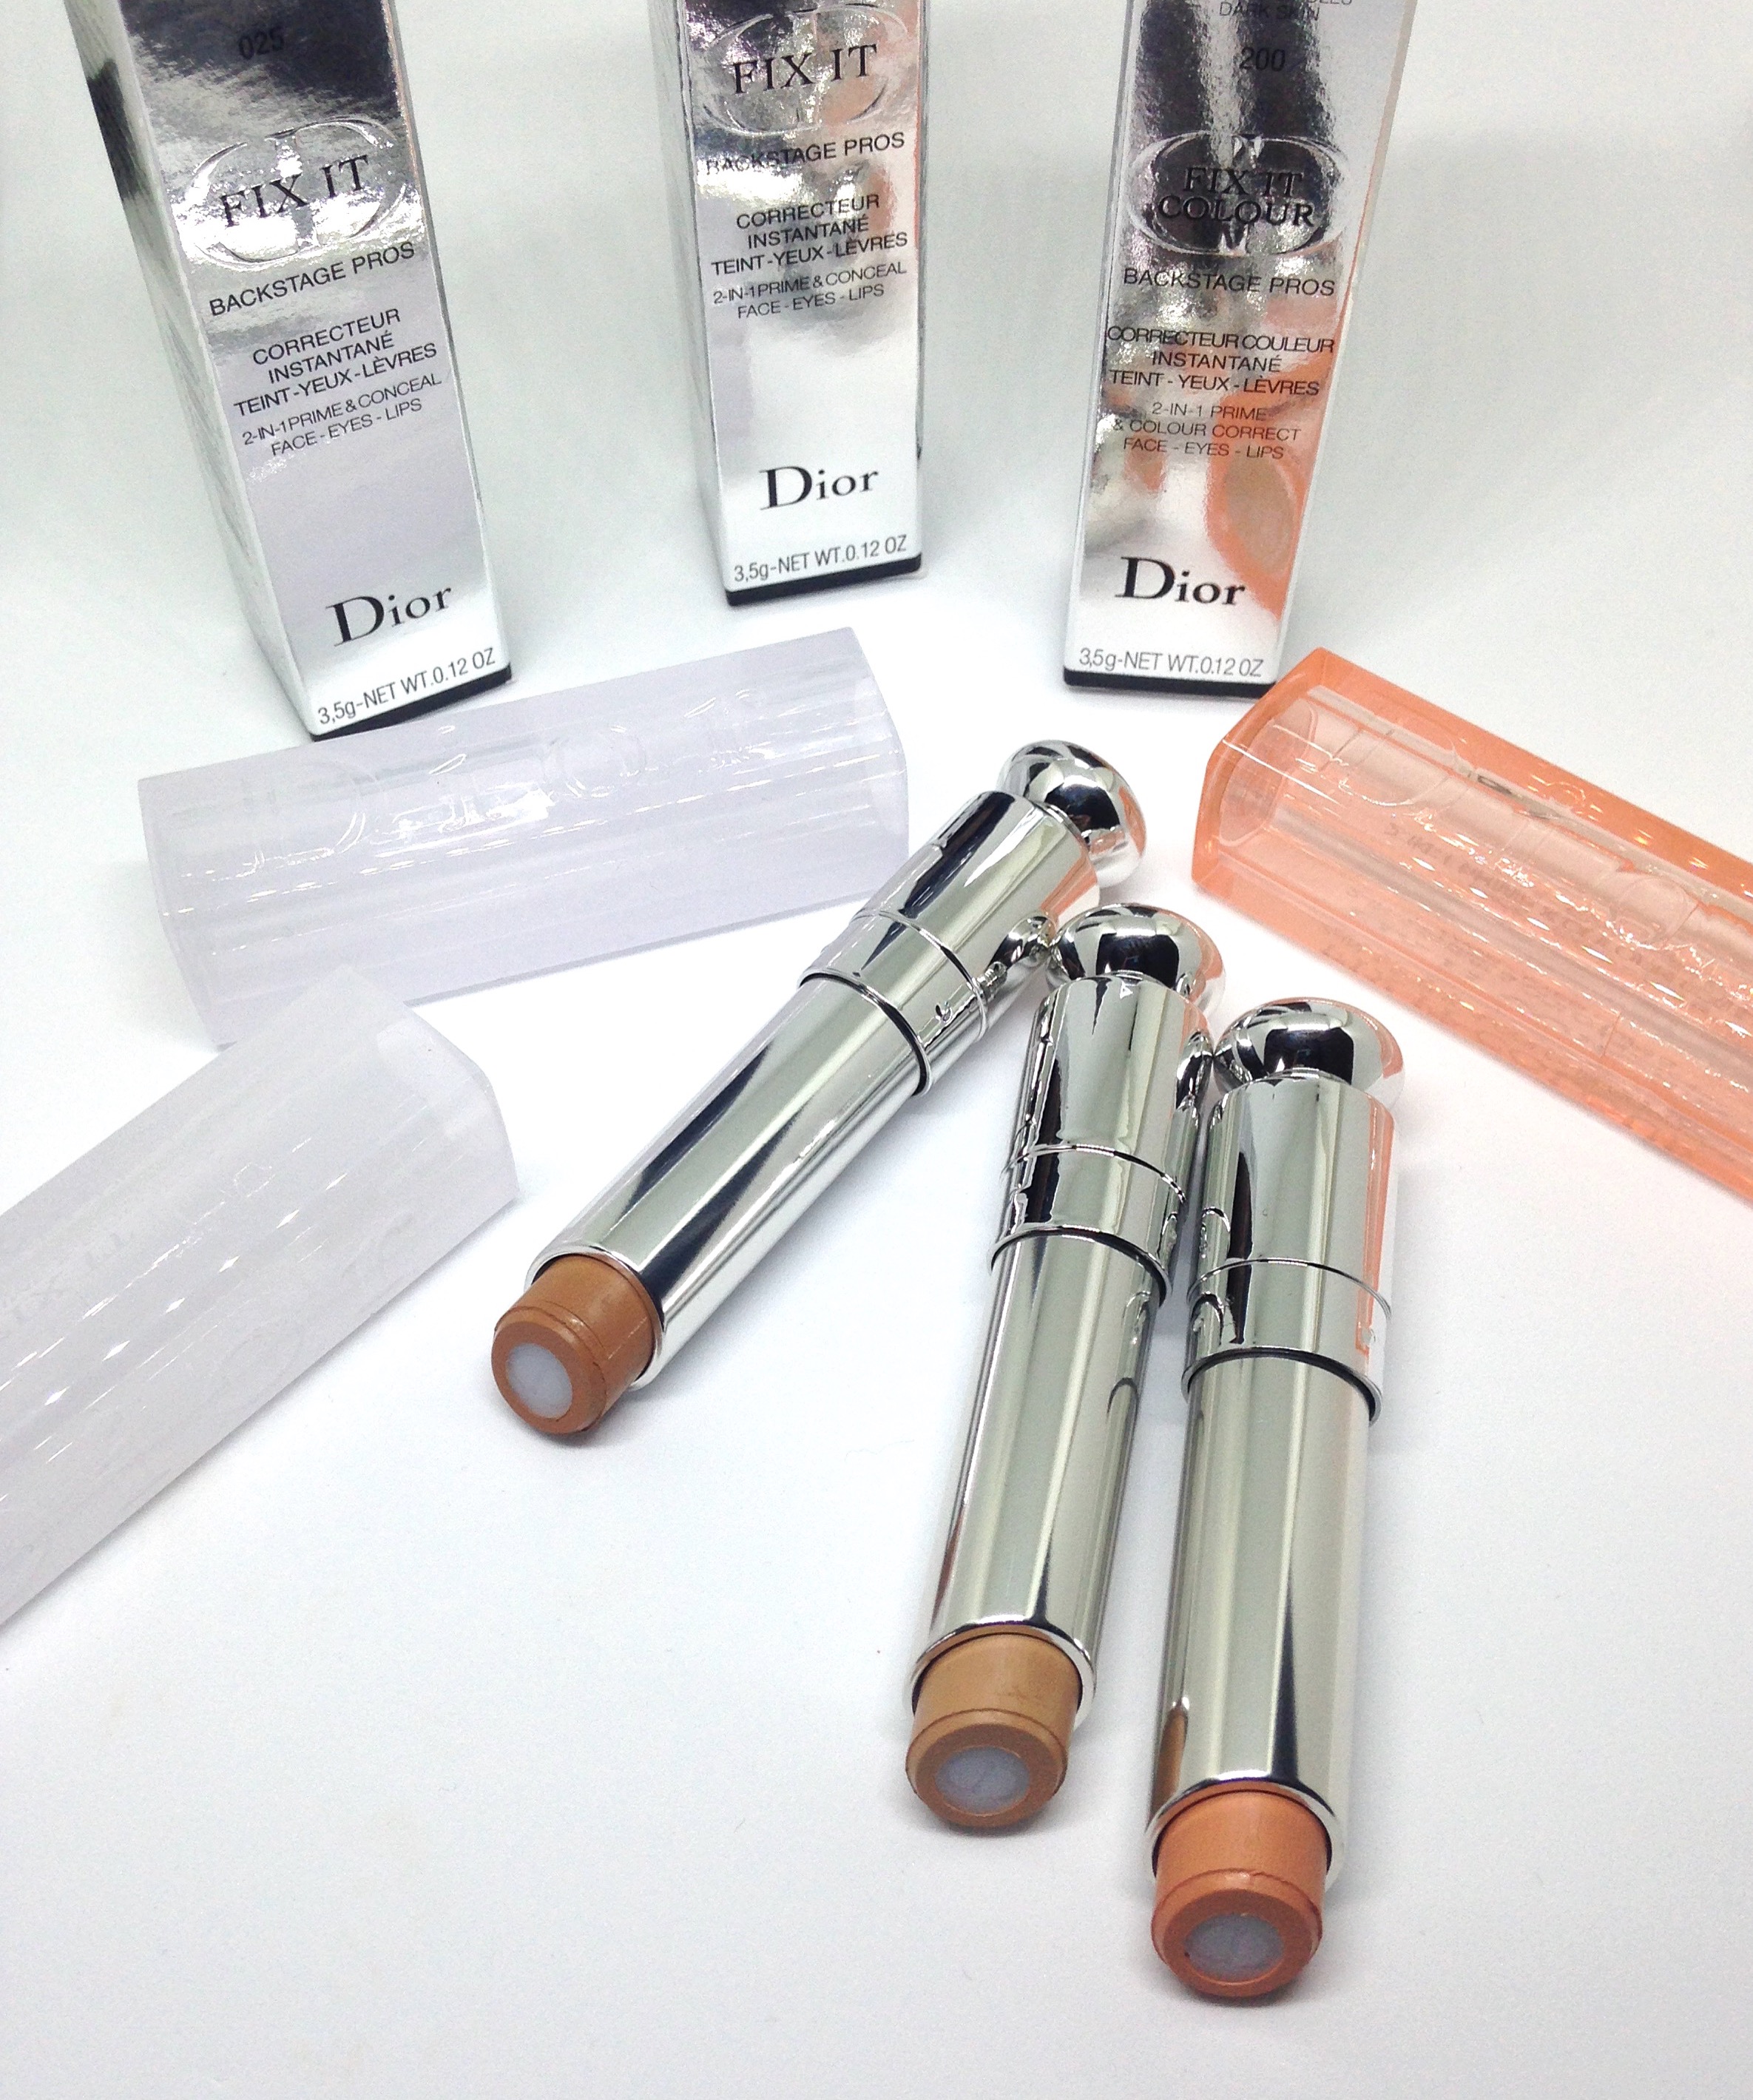 dior prime and conceal